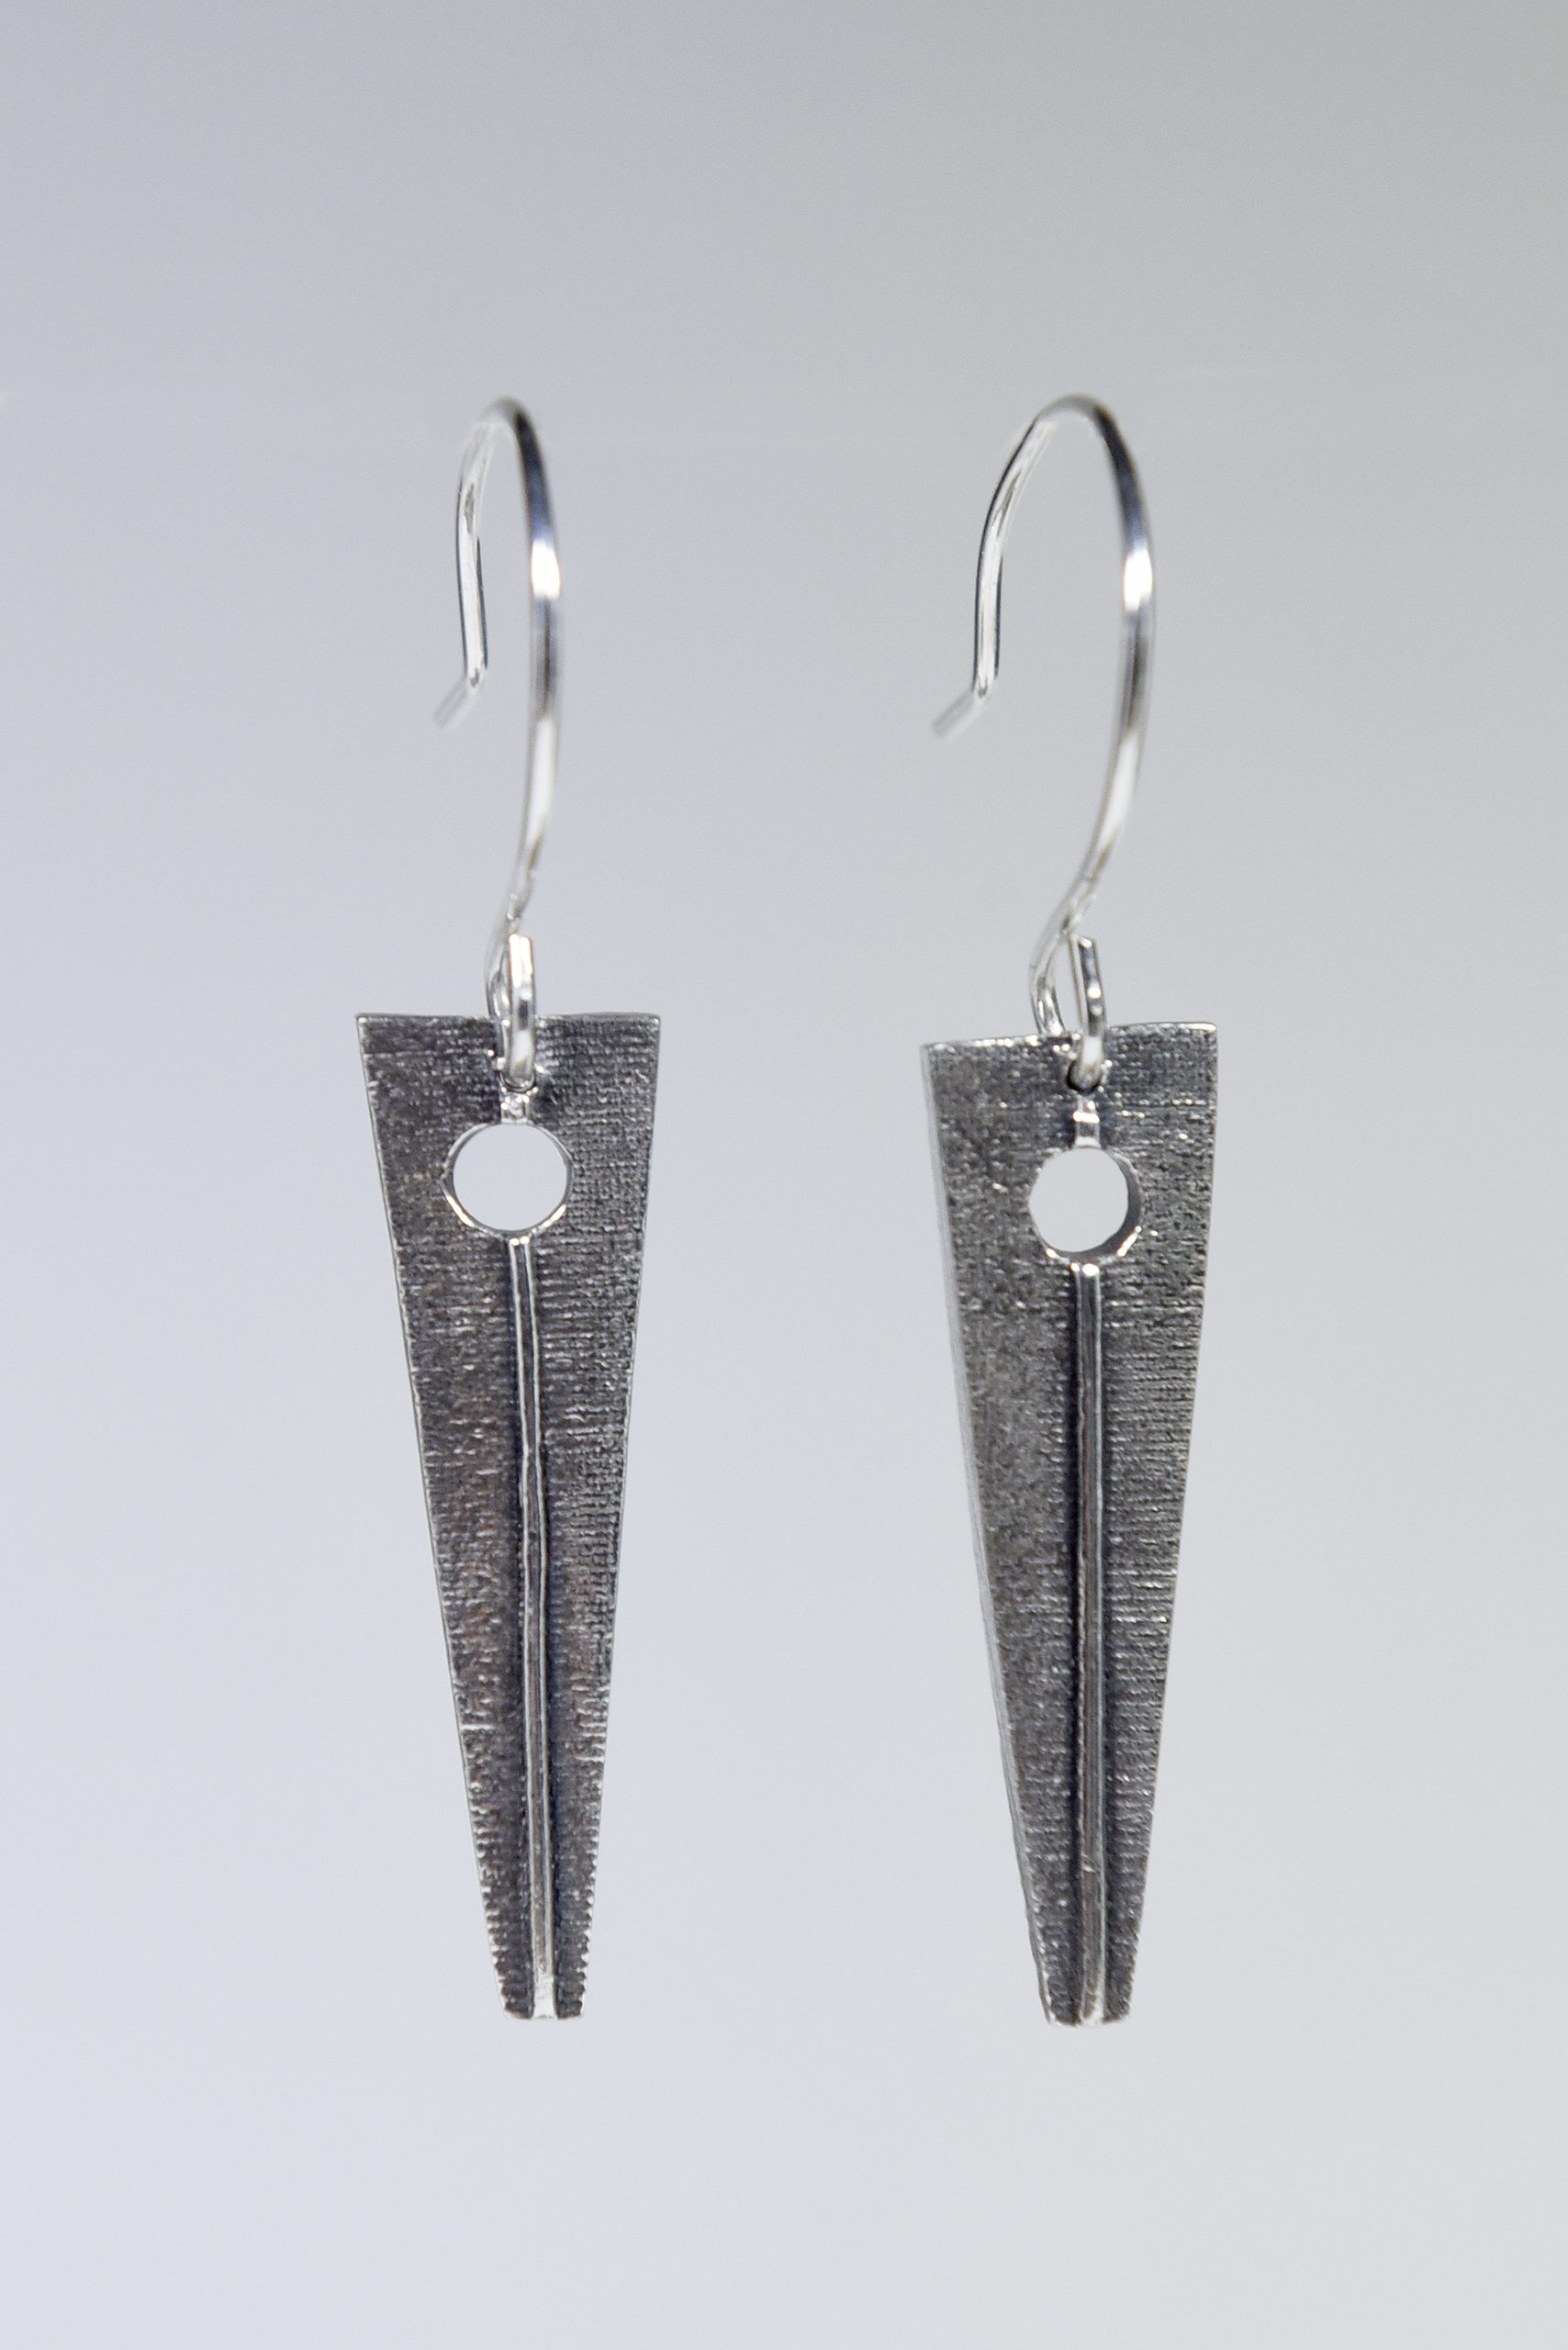 A pair of silver triangular dangling earrings on a grey background.